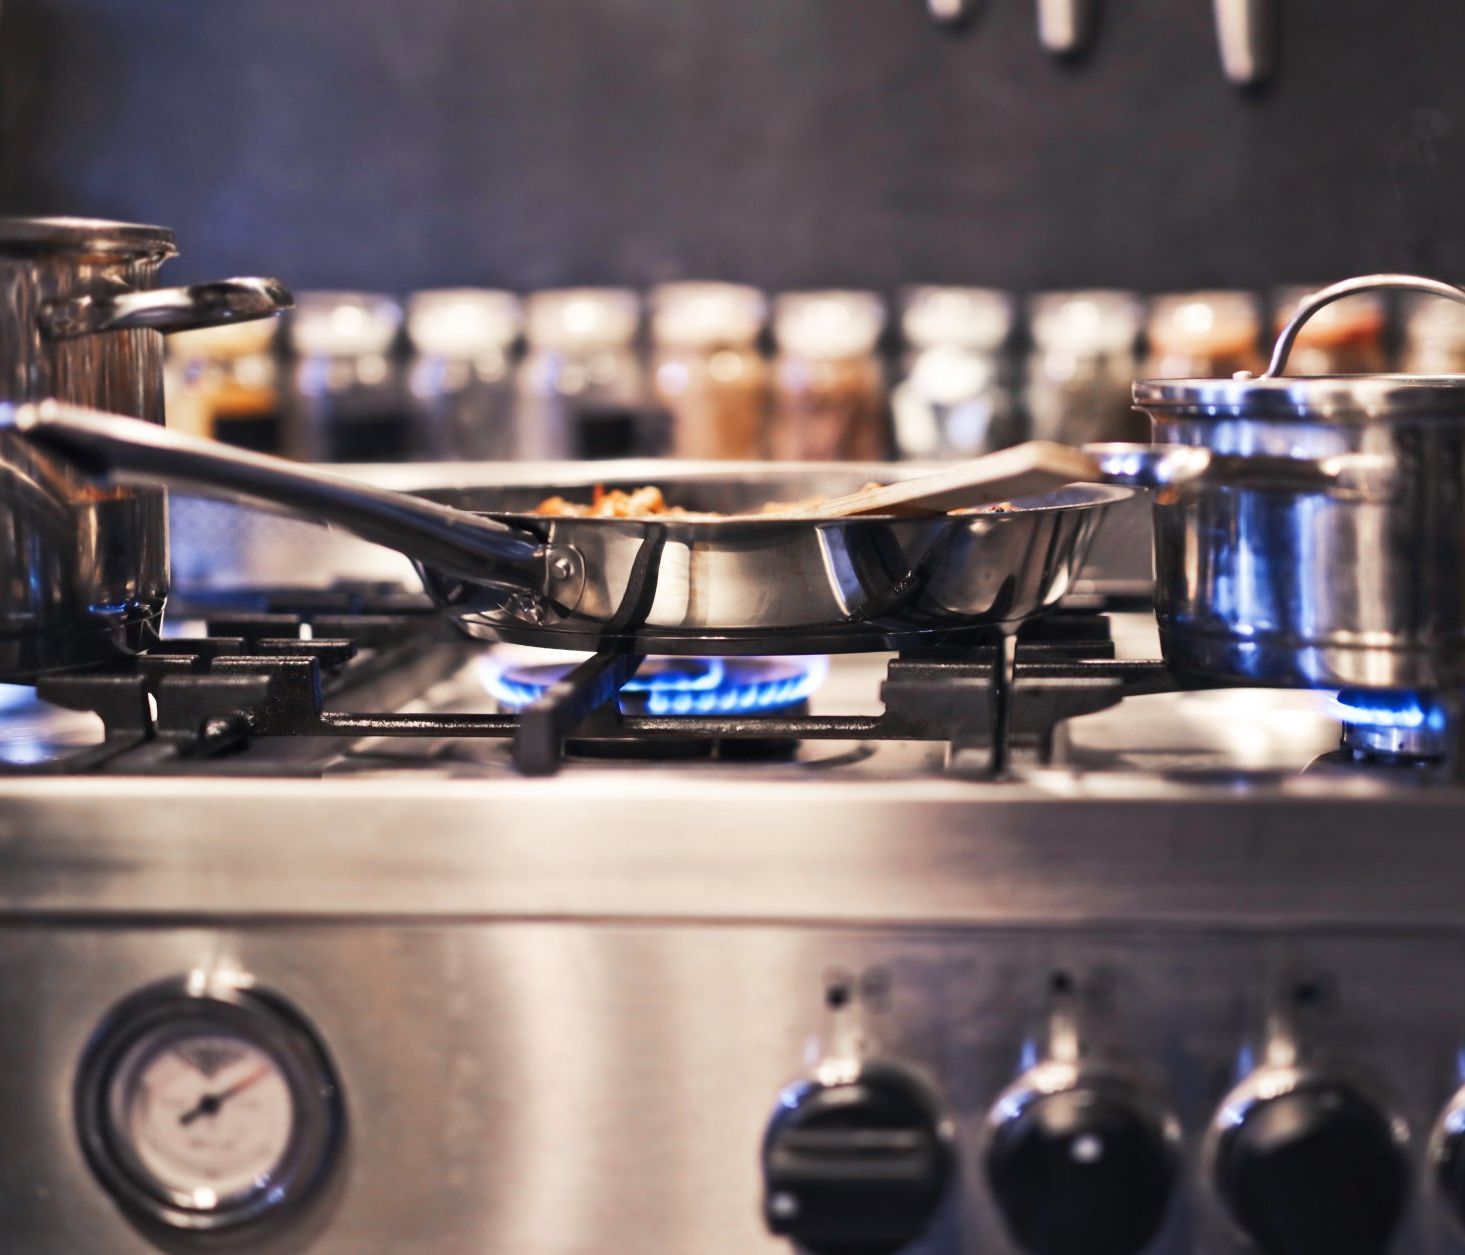 A gas stove with a pan sitting on the burner, emitting flames and heat as it cooks food.